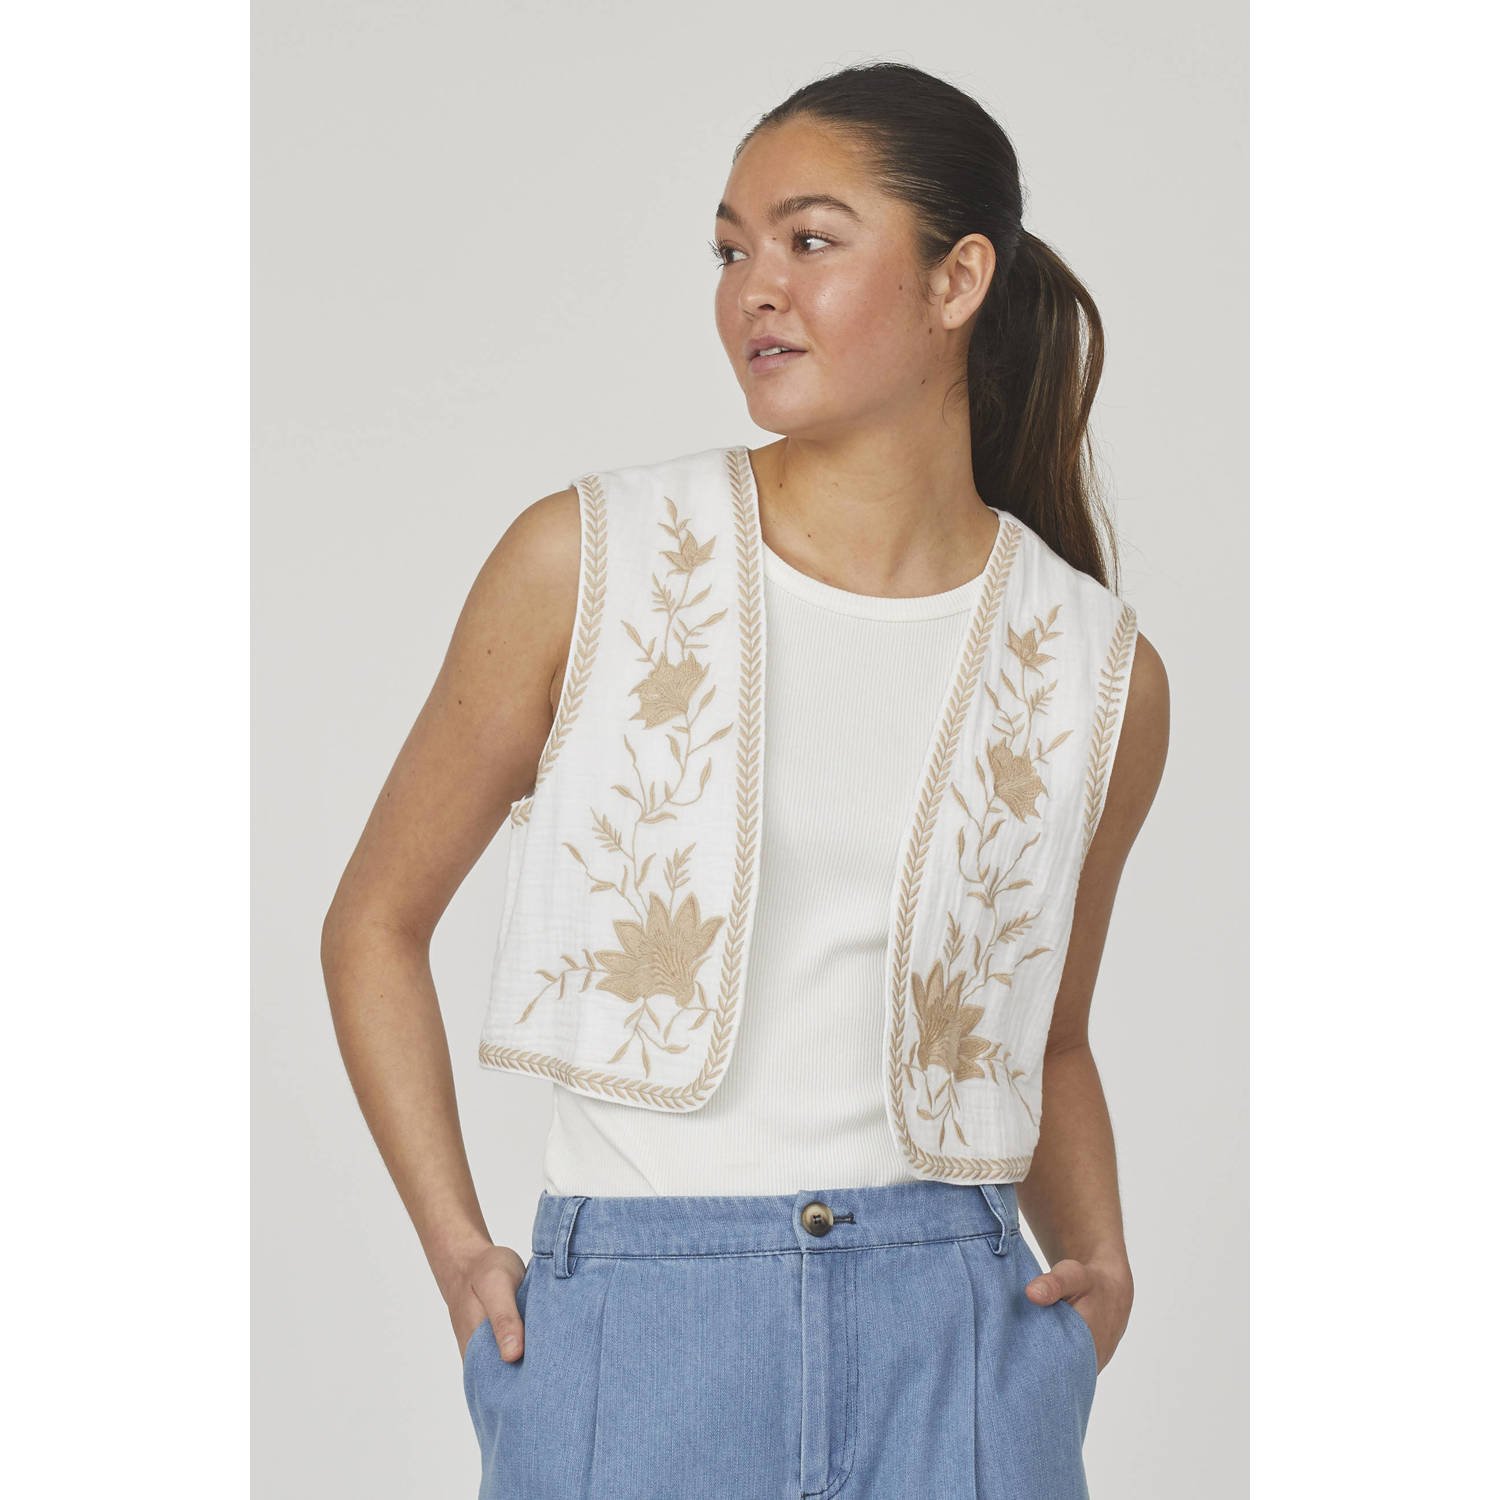 SisterS Point gilet met all over print en borduursels wit zand